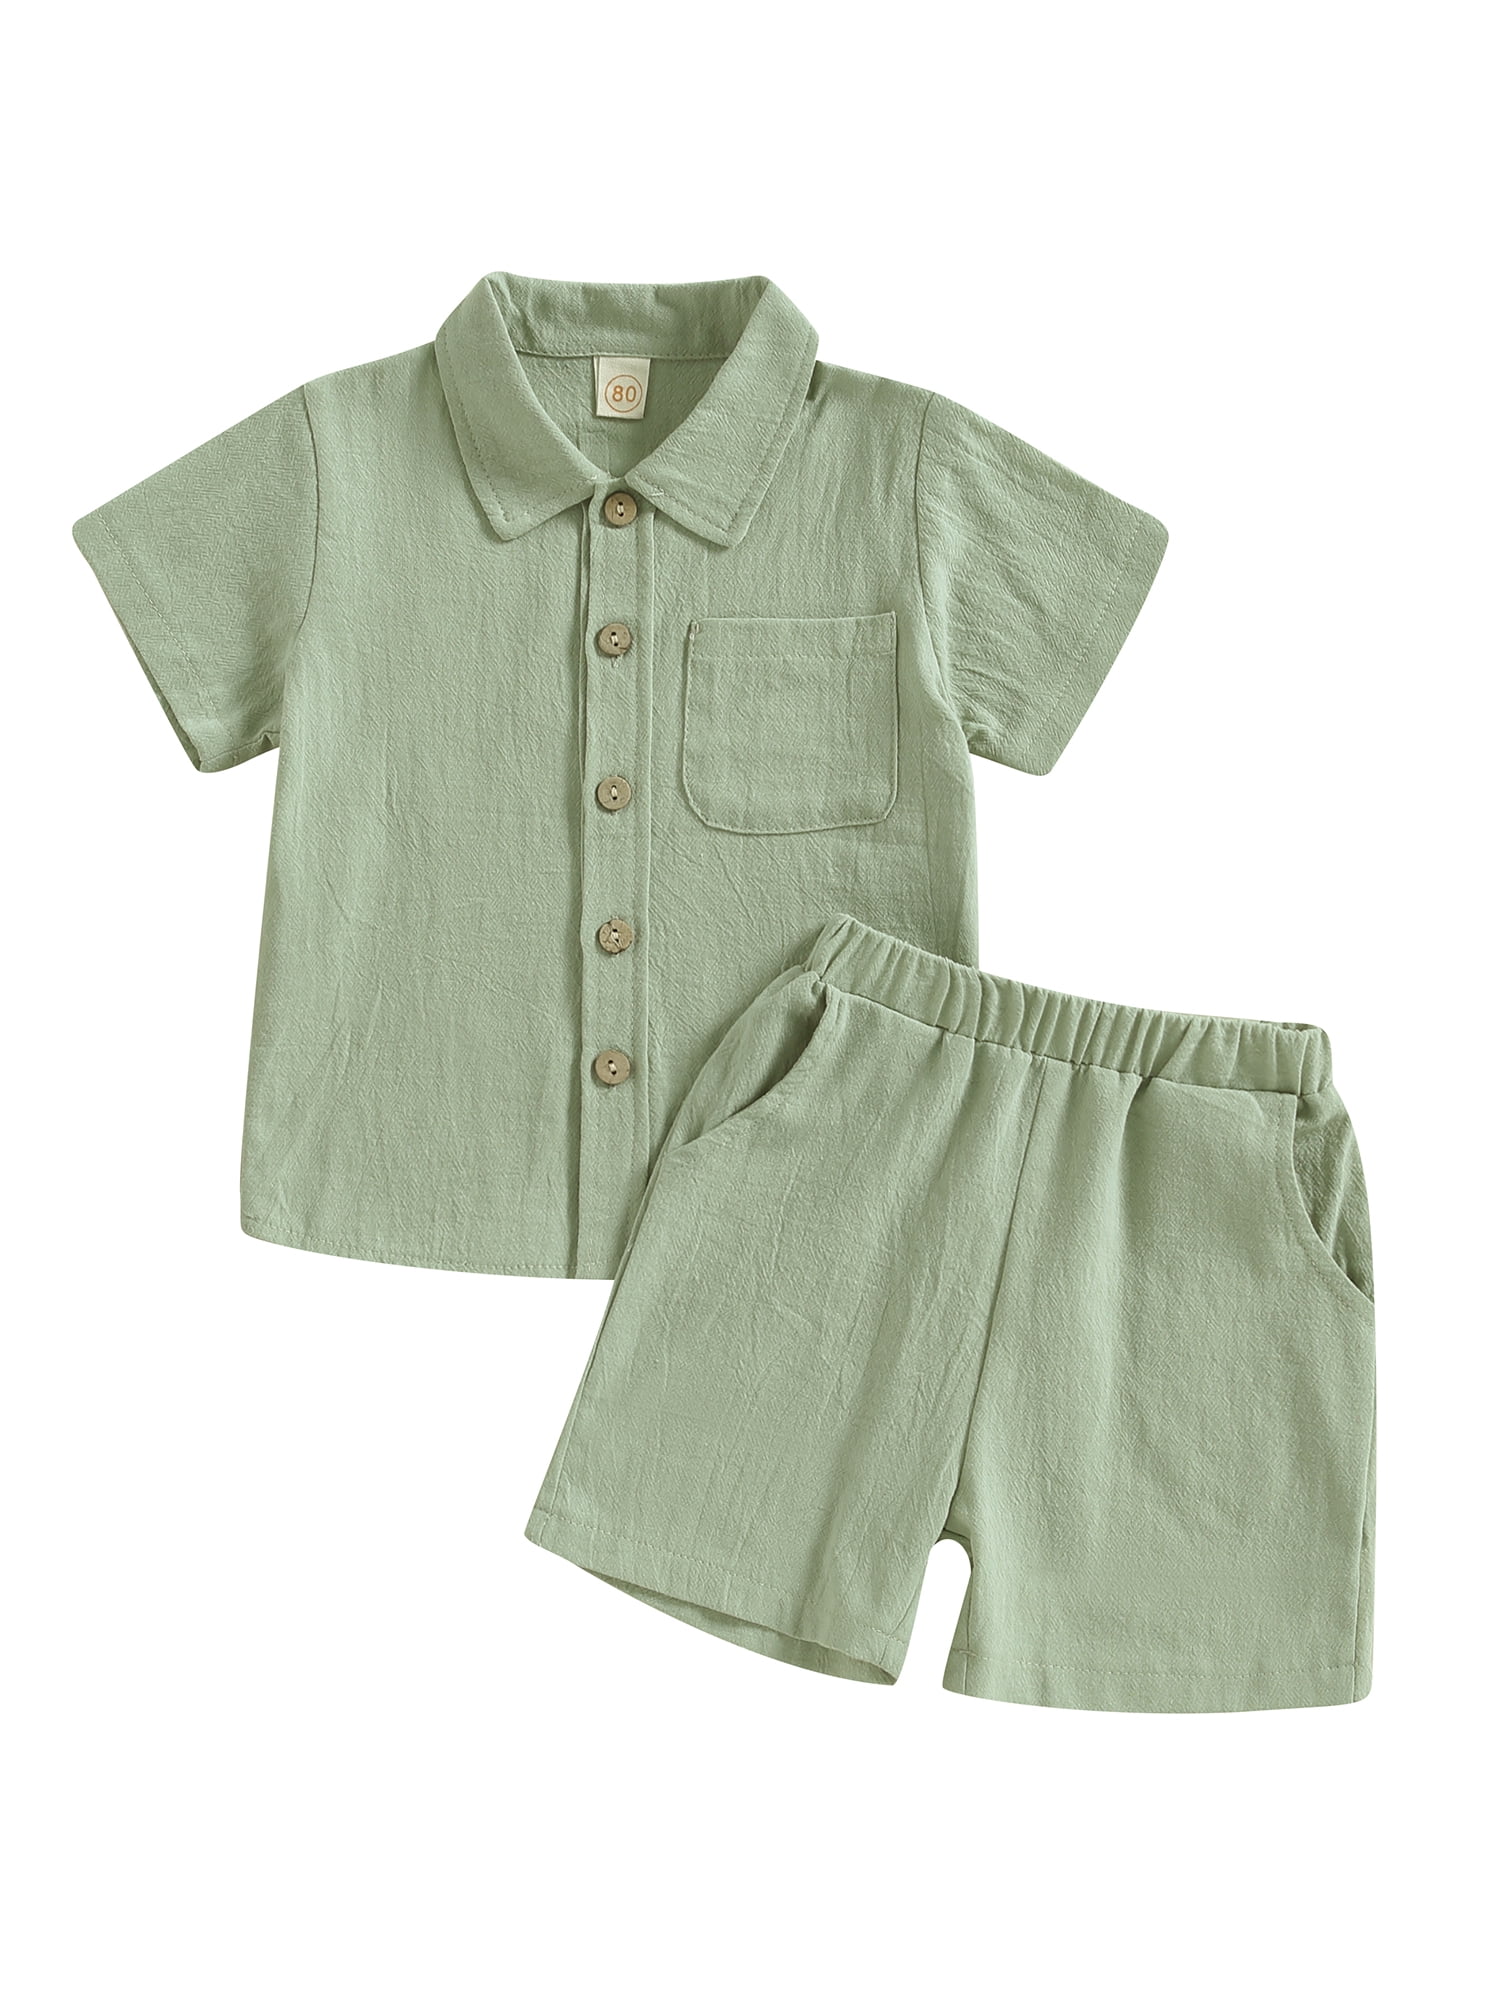 Boys Girls Fashion Clothes Summer Comfy Outfits Kids Cute Short Sleeve  T-Shirt Top Shorts Set Newborn Solid Casual Clothing